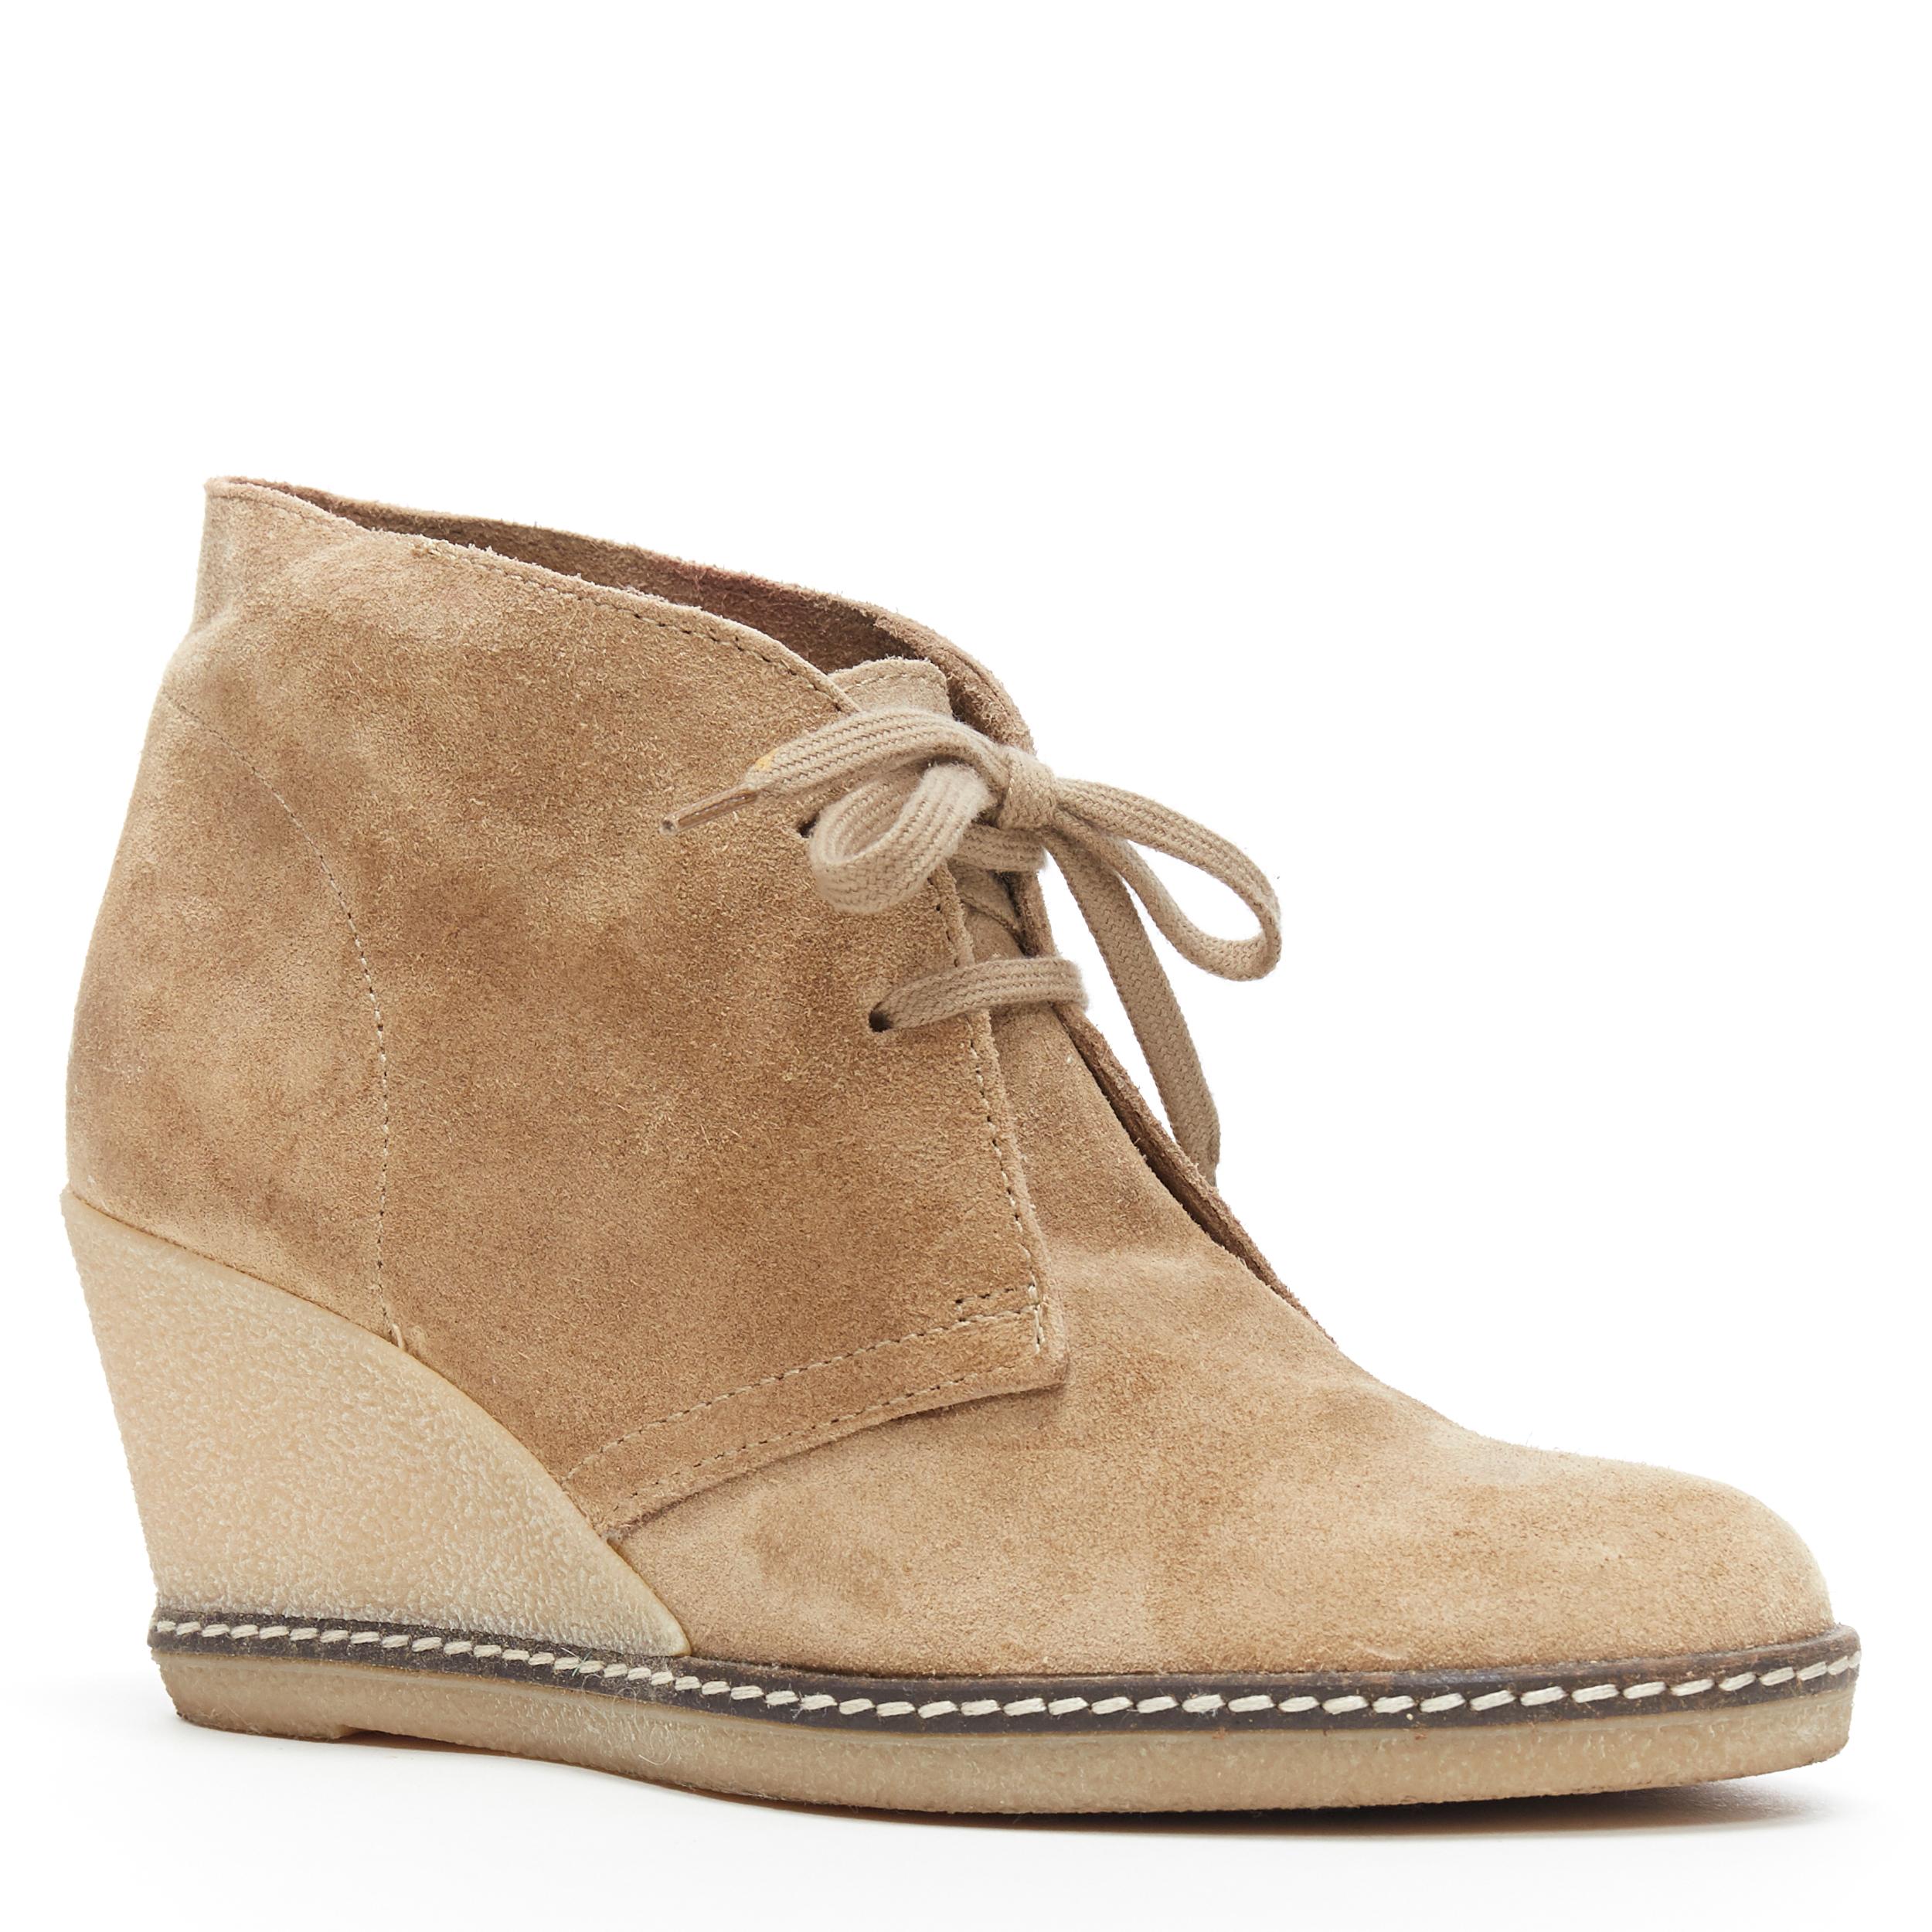 J.CREW tan suede rubber wedge lace front desert bootie EU37.5 
Reference: LNKO/A01379 
Brand: J.CREW 
Material: Suede 
Color: Brown 
Pattern: Solid 
Closure: Lace Up 
Made in: Italy 


CONDITION: 
Condition: Fair, this item was pre-owned and is in